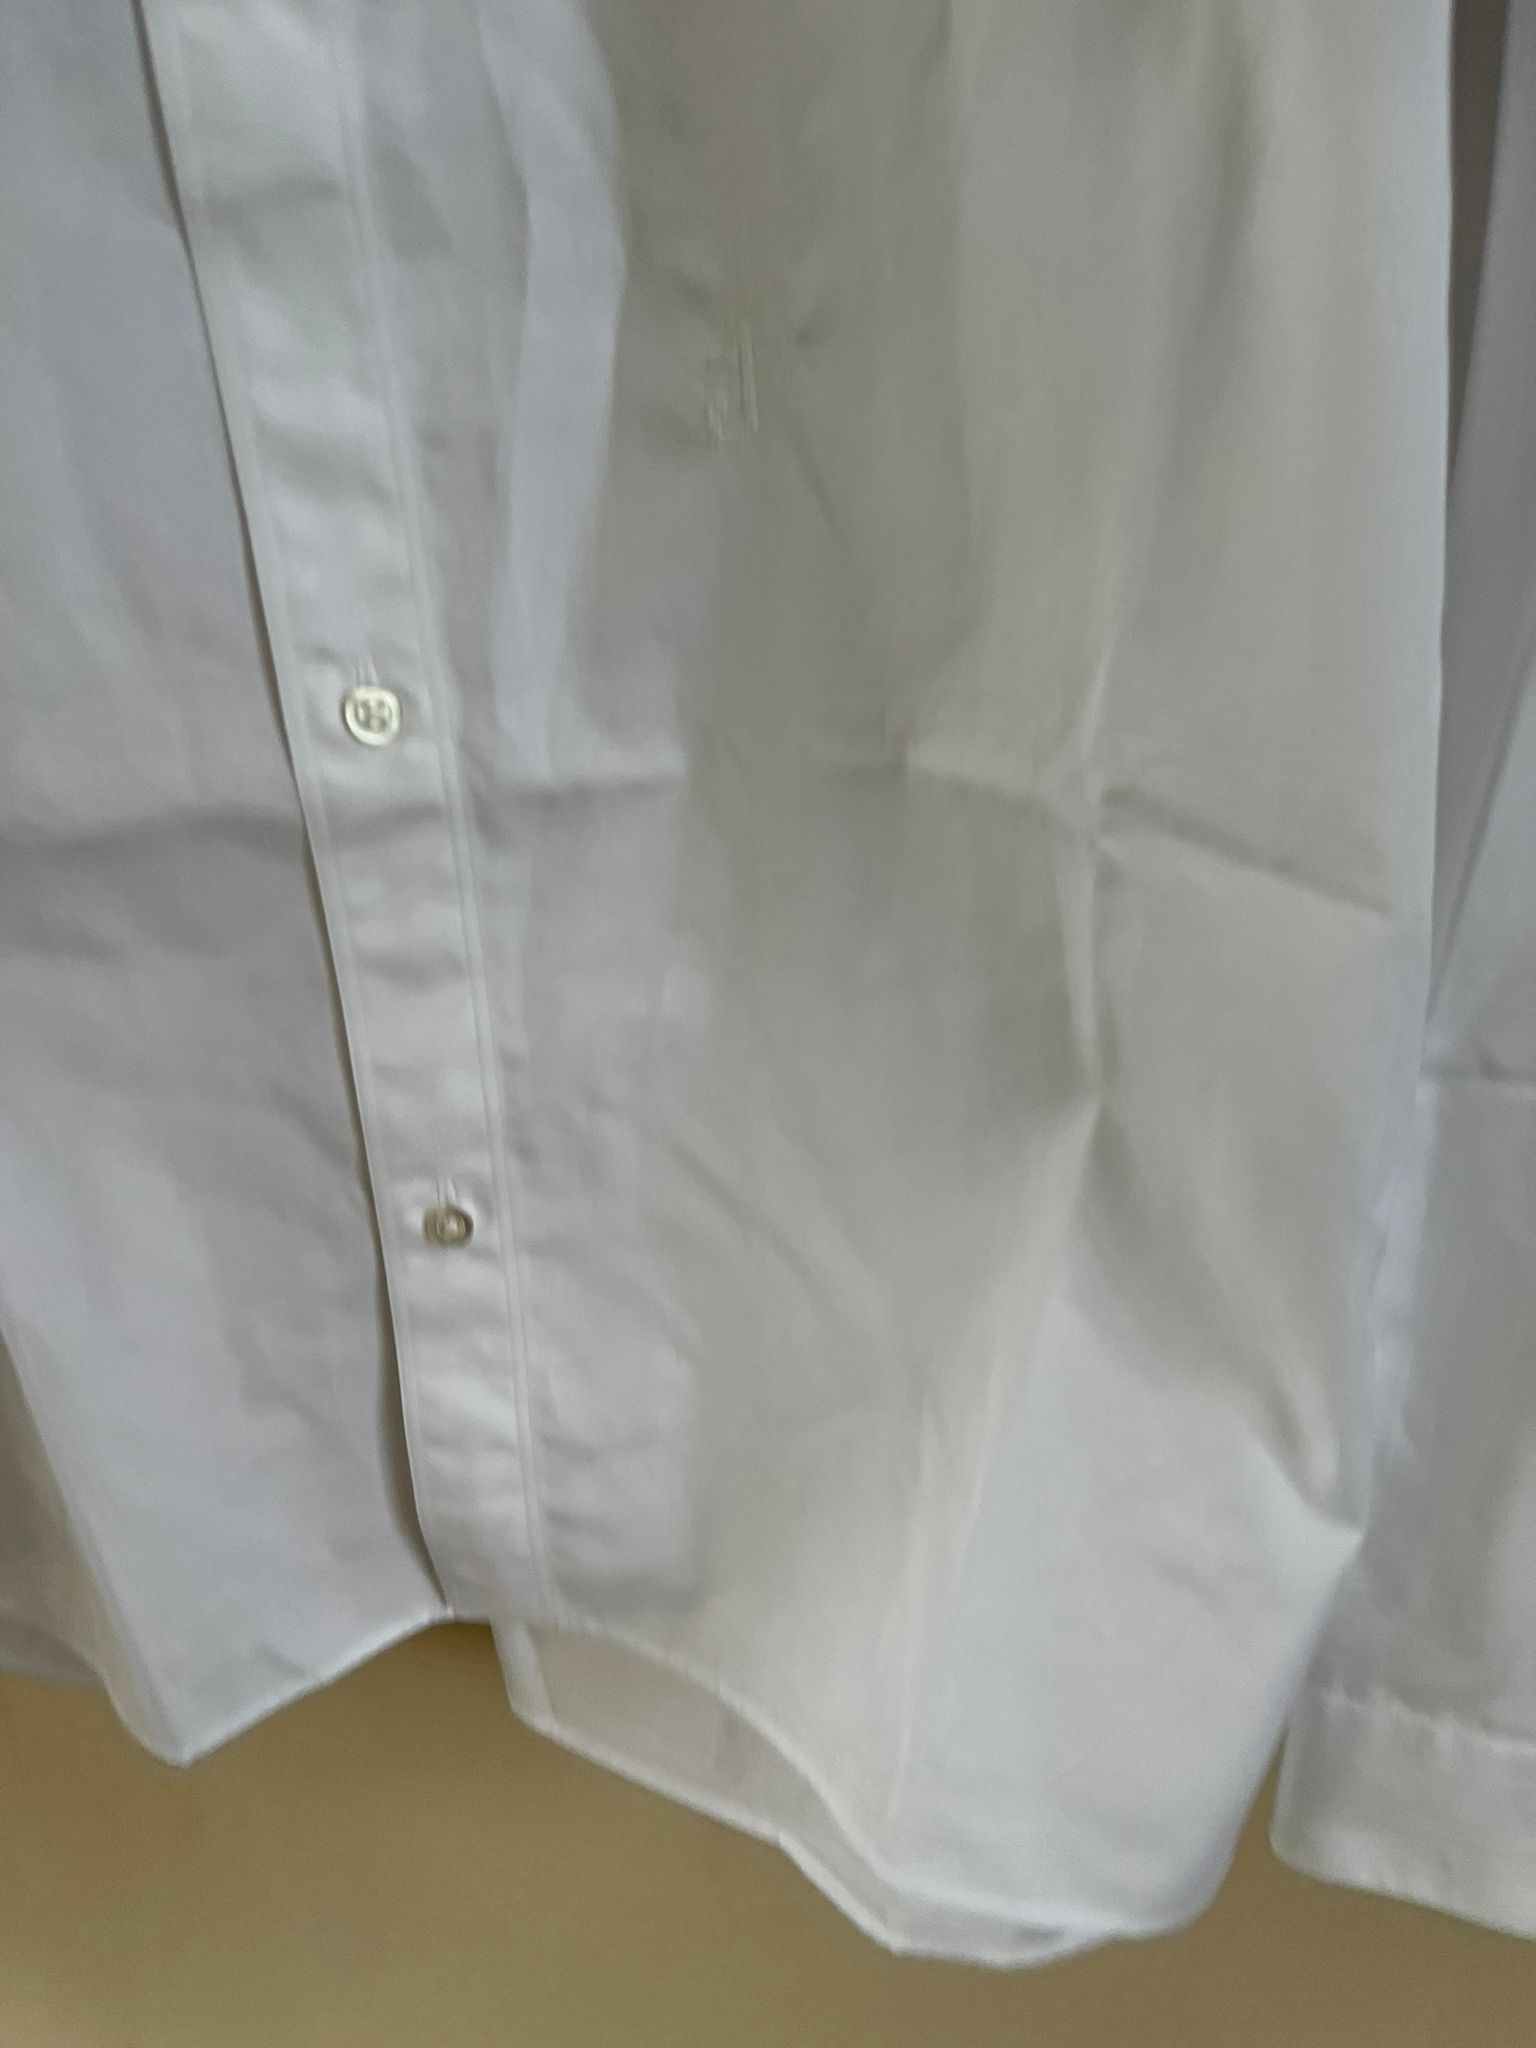 Jil Sander Embroidered Thursday Button Up in White Size US M / EU 48-50 / 2 - 3 Thumbnail